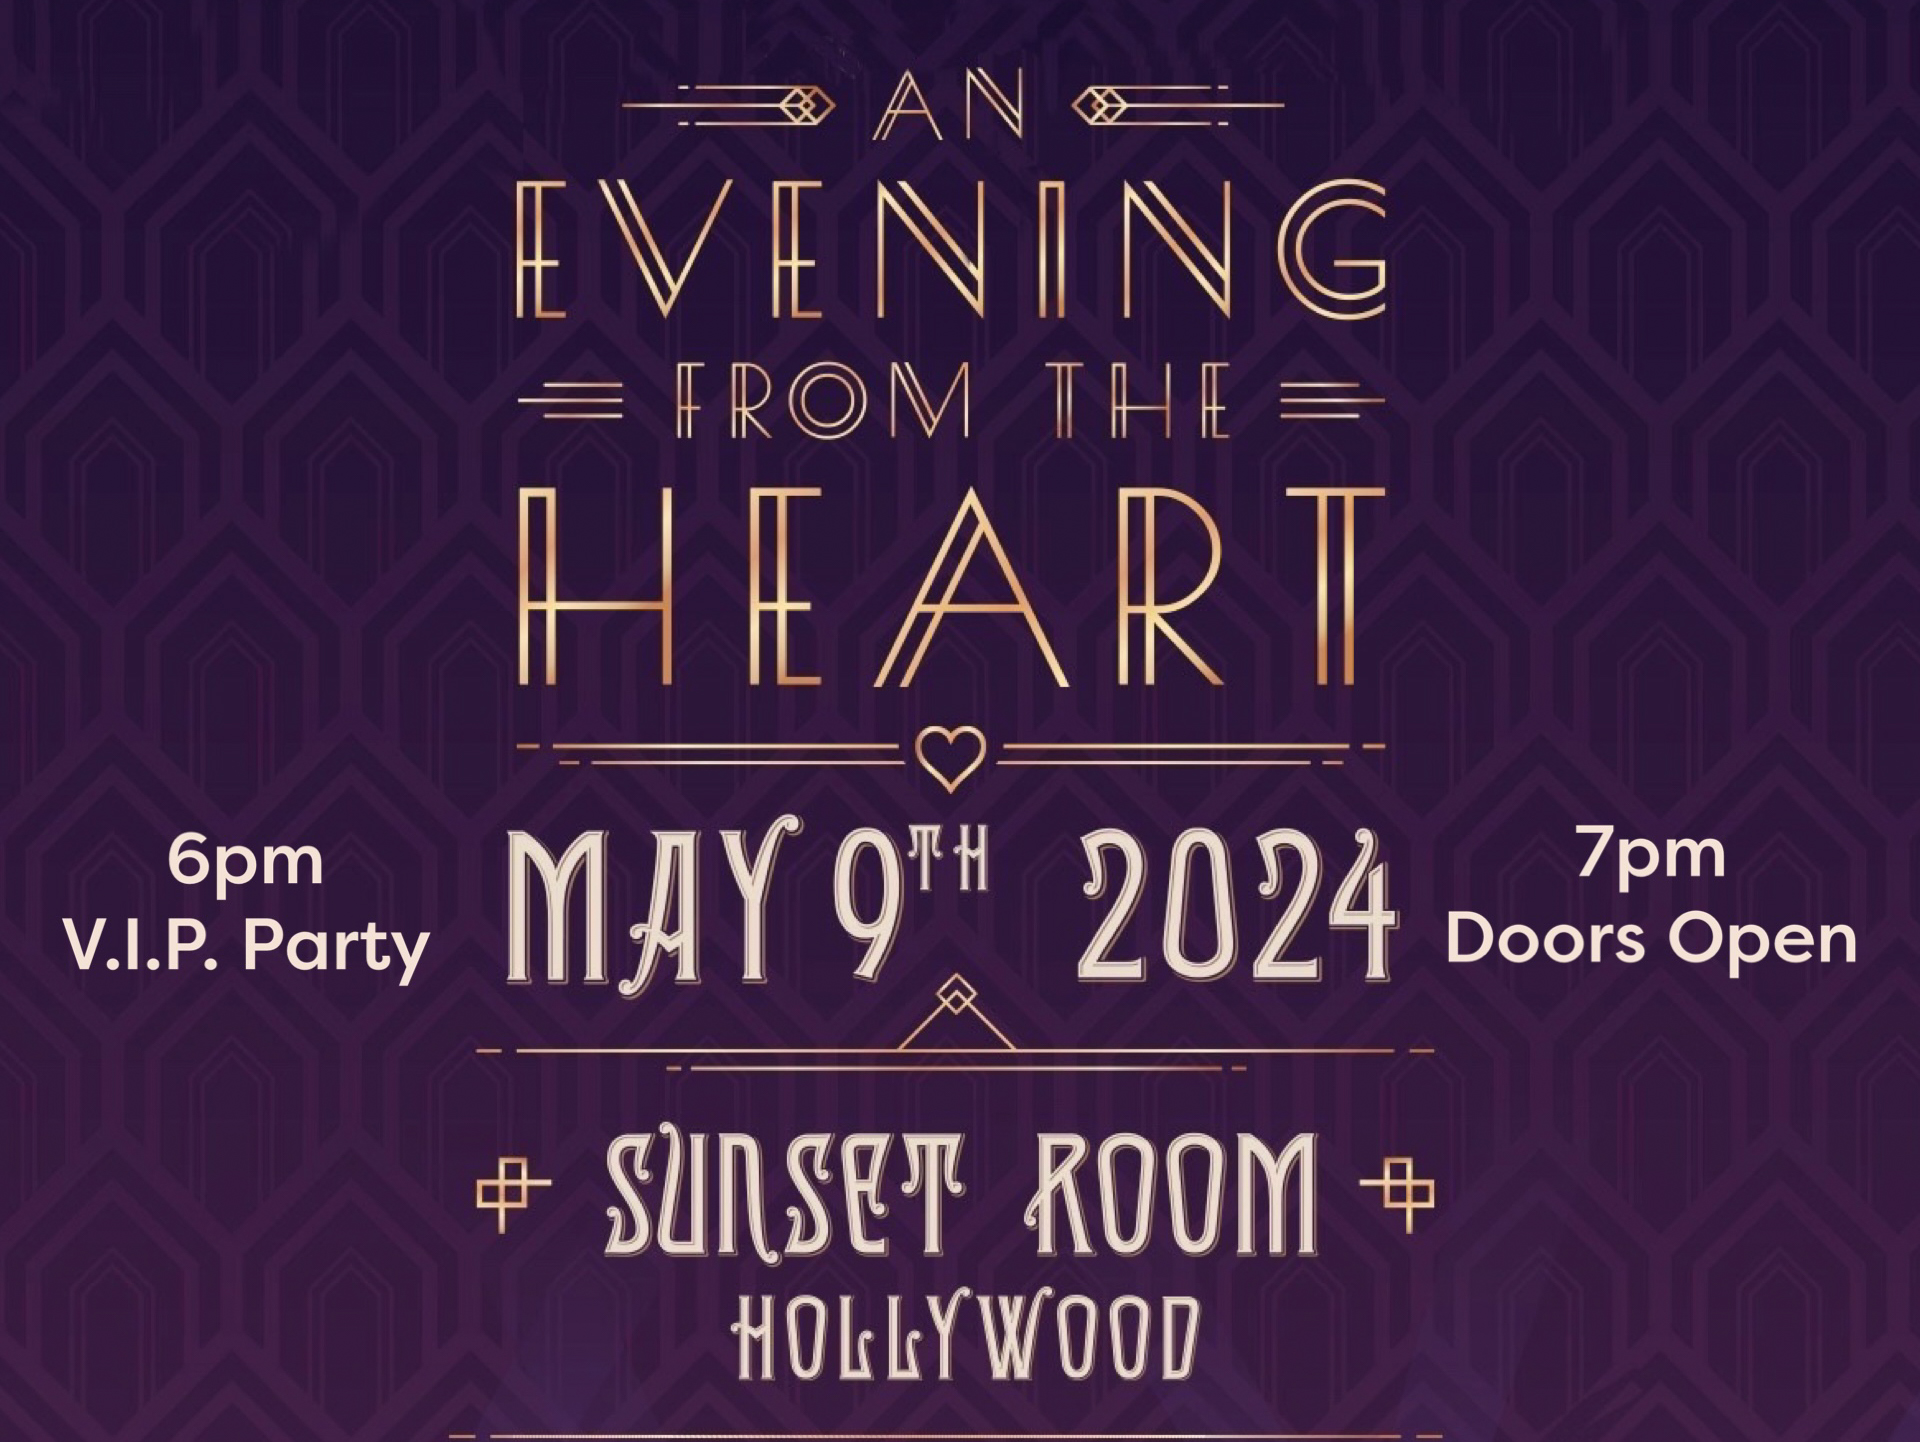 An evening from the heart. 6 pm VIP party, 7 pm doors open. May 9, 2024. Sunset Room. Hollywood. For sponsorship opportunities, please contact Meredith O'Neal at meredith.oneal@johnritterfoundation.org 214-500-5290. johnritterfoundation.org. An art deco inspired poster.